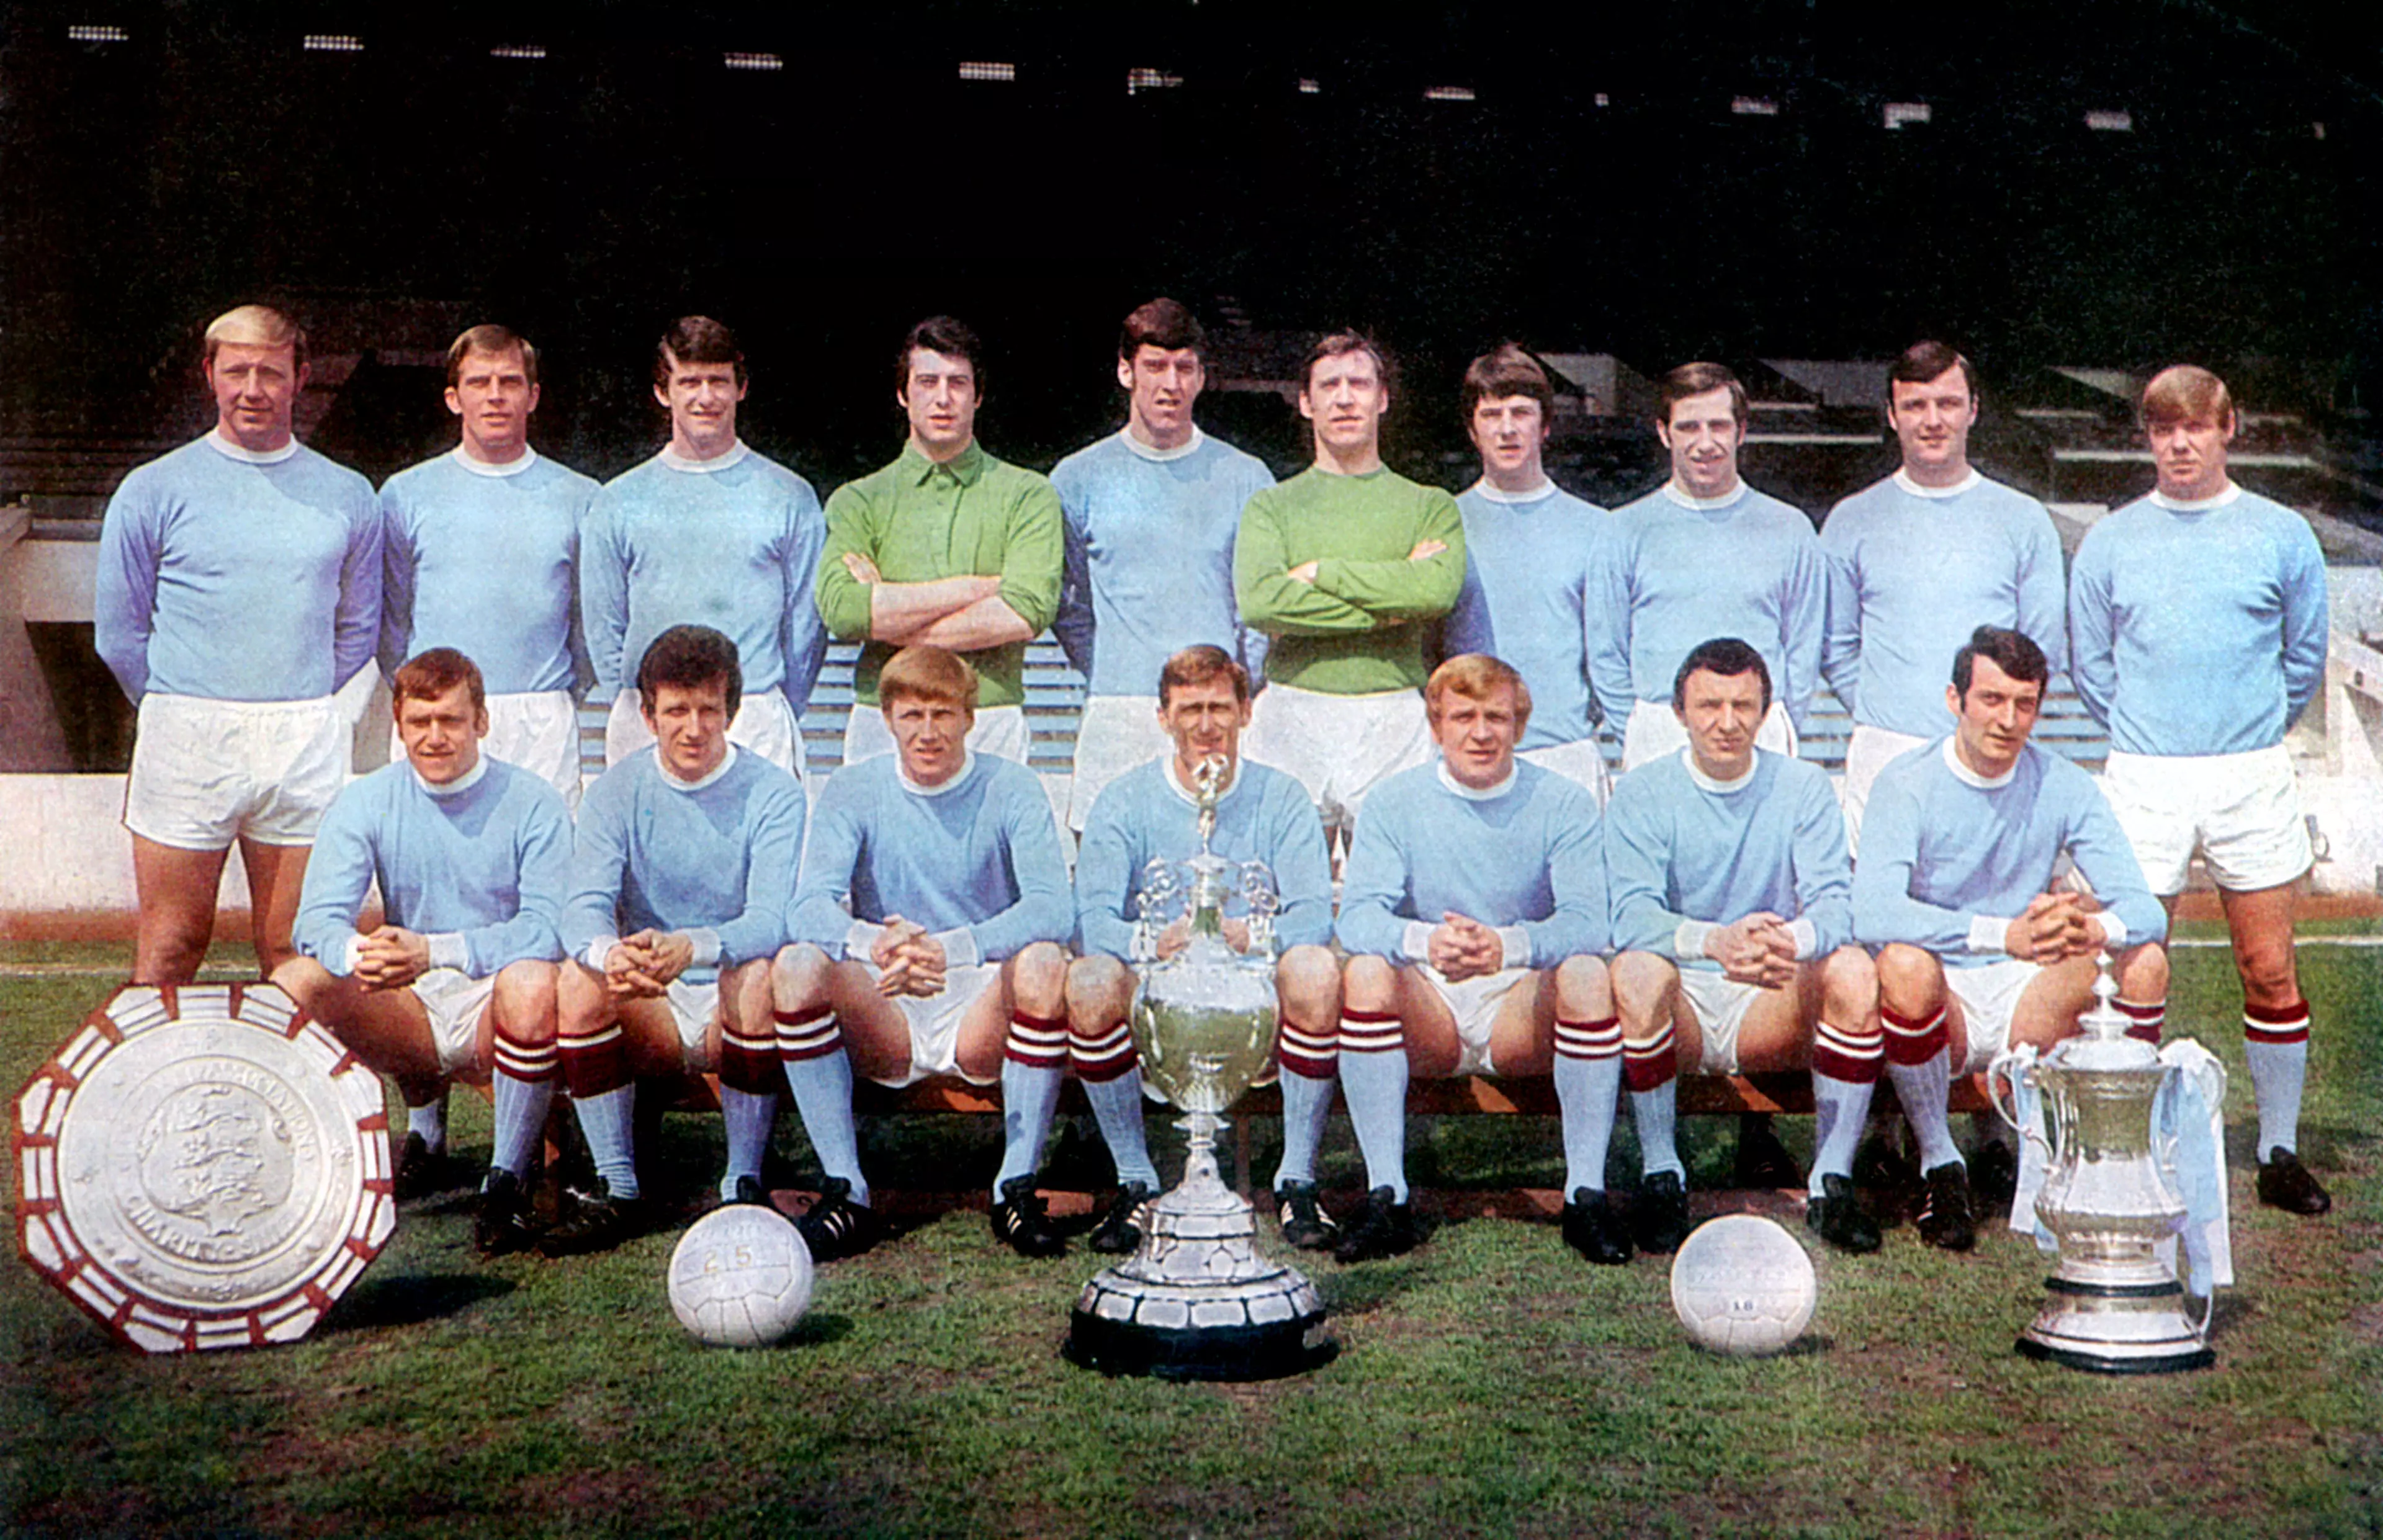 City with some of their titles from the late 60s. Image: PA Images